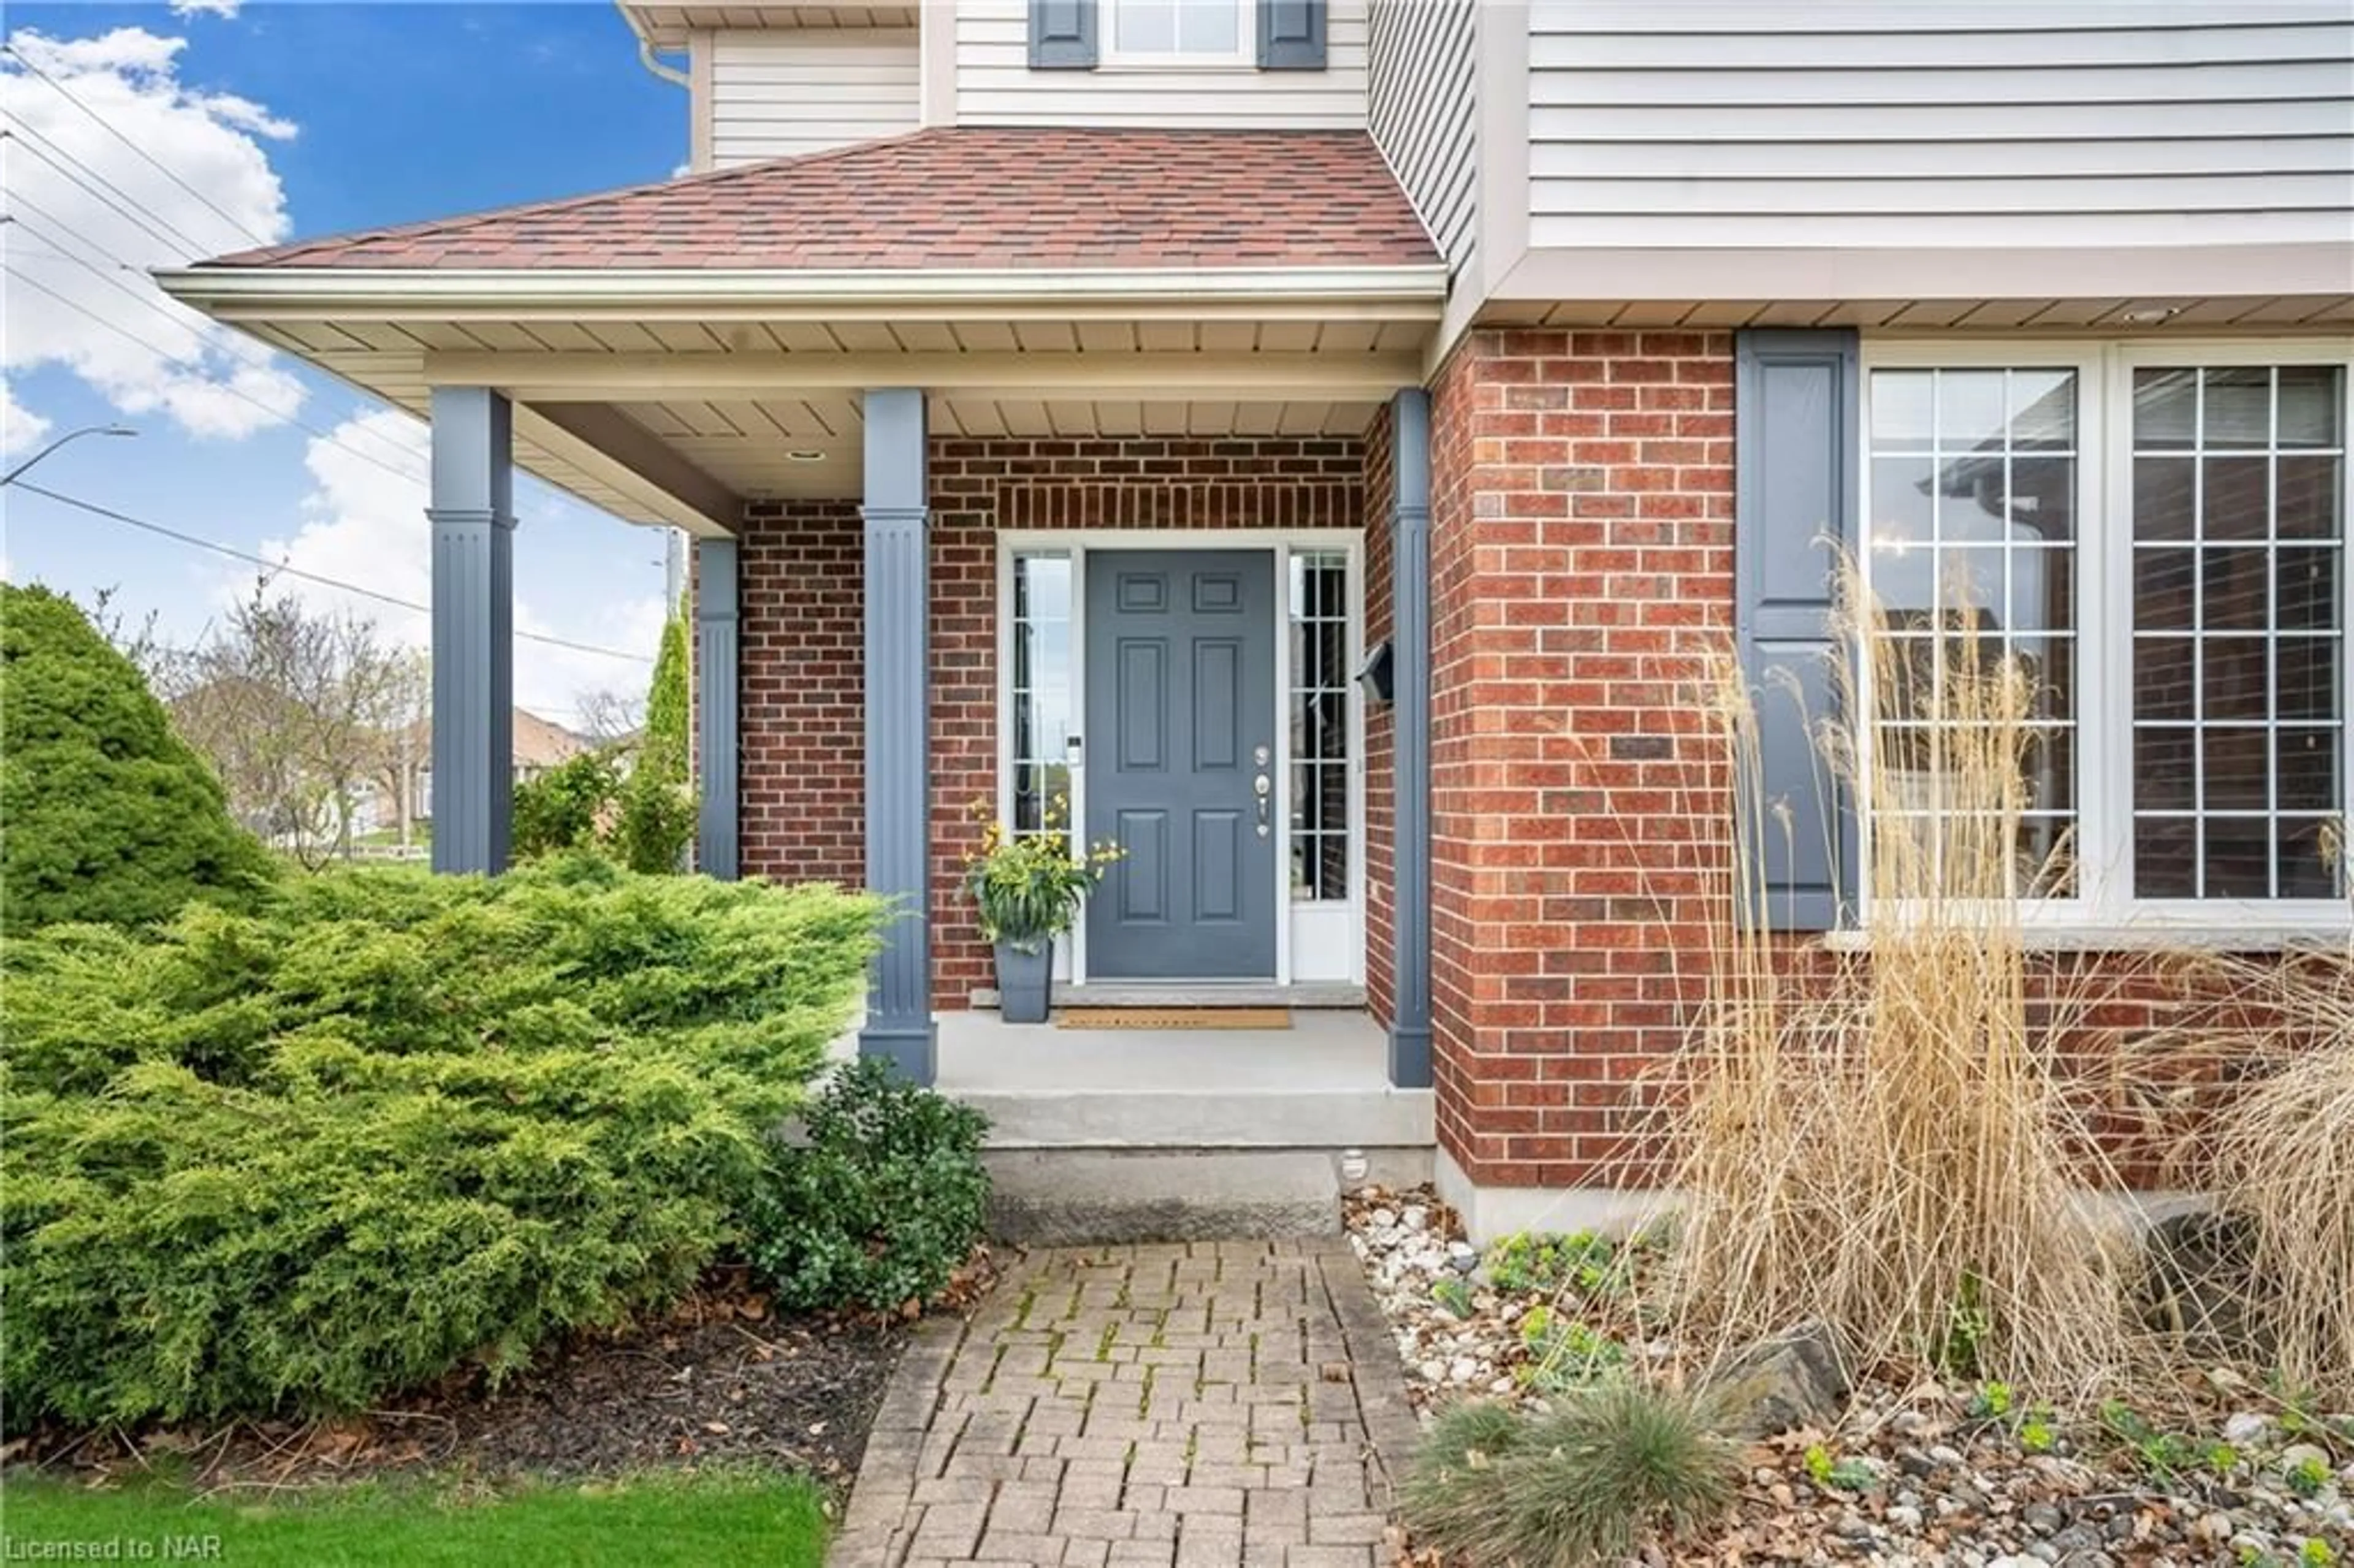 Home with brick exterior material for 2 Briarwood Dr, St. Catharines Ontario L2S 4A7